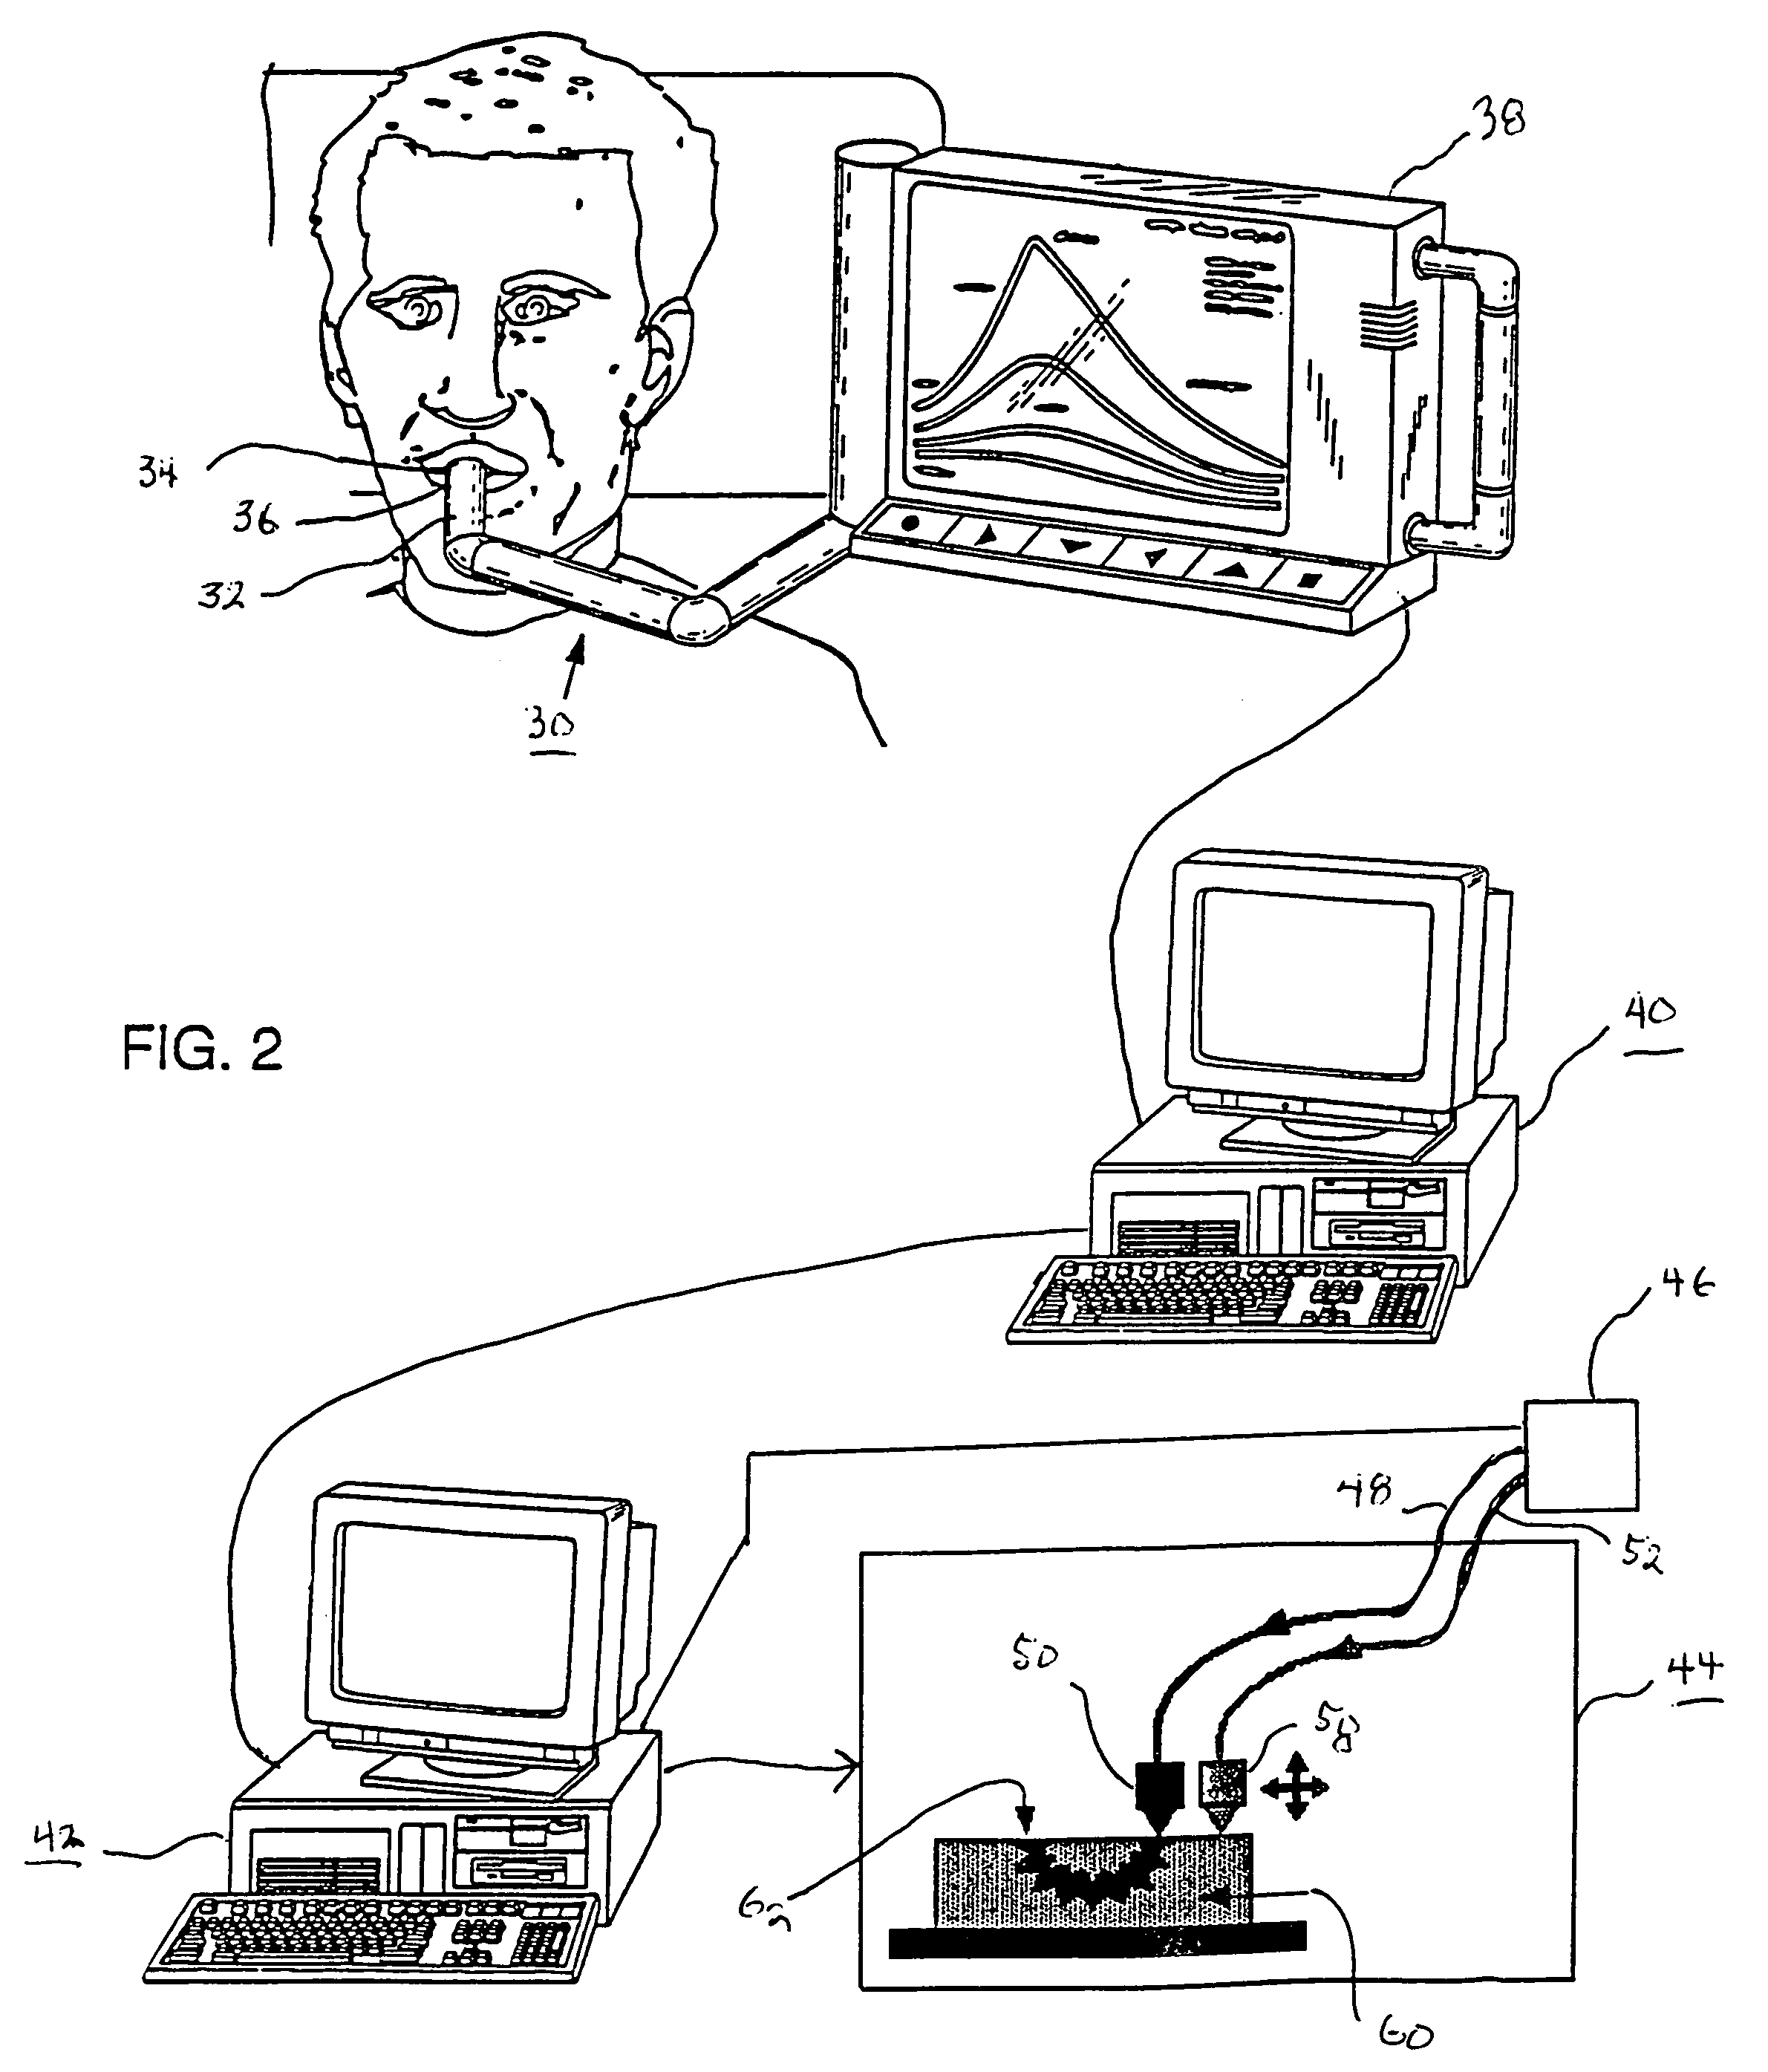 Method for automatically creating a denture using laser altimetry to create a digital 3-D oral cavity model and using a digital internet connection to a rapid stereolithographic modeling machine